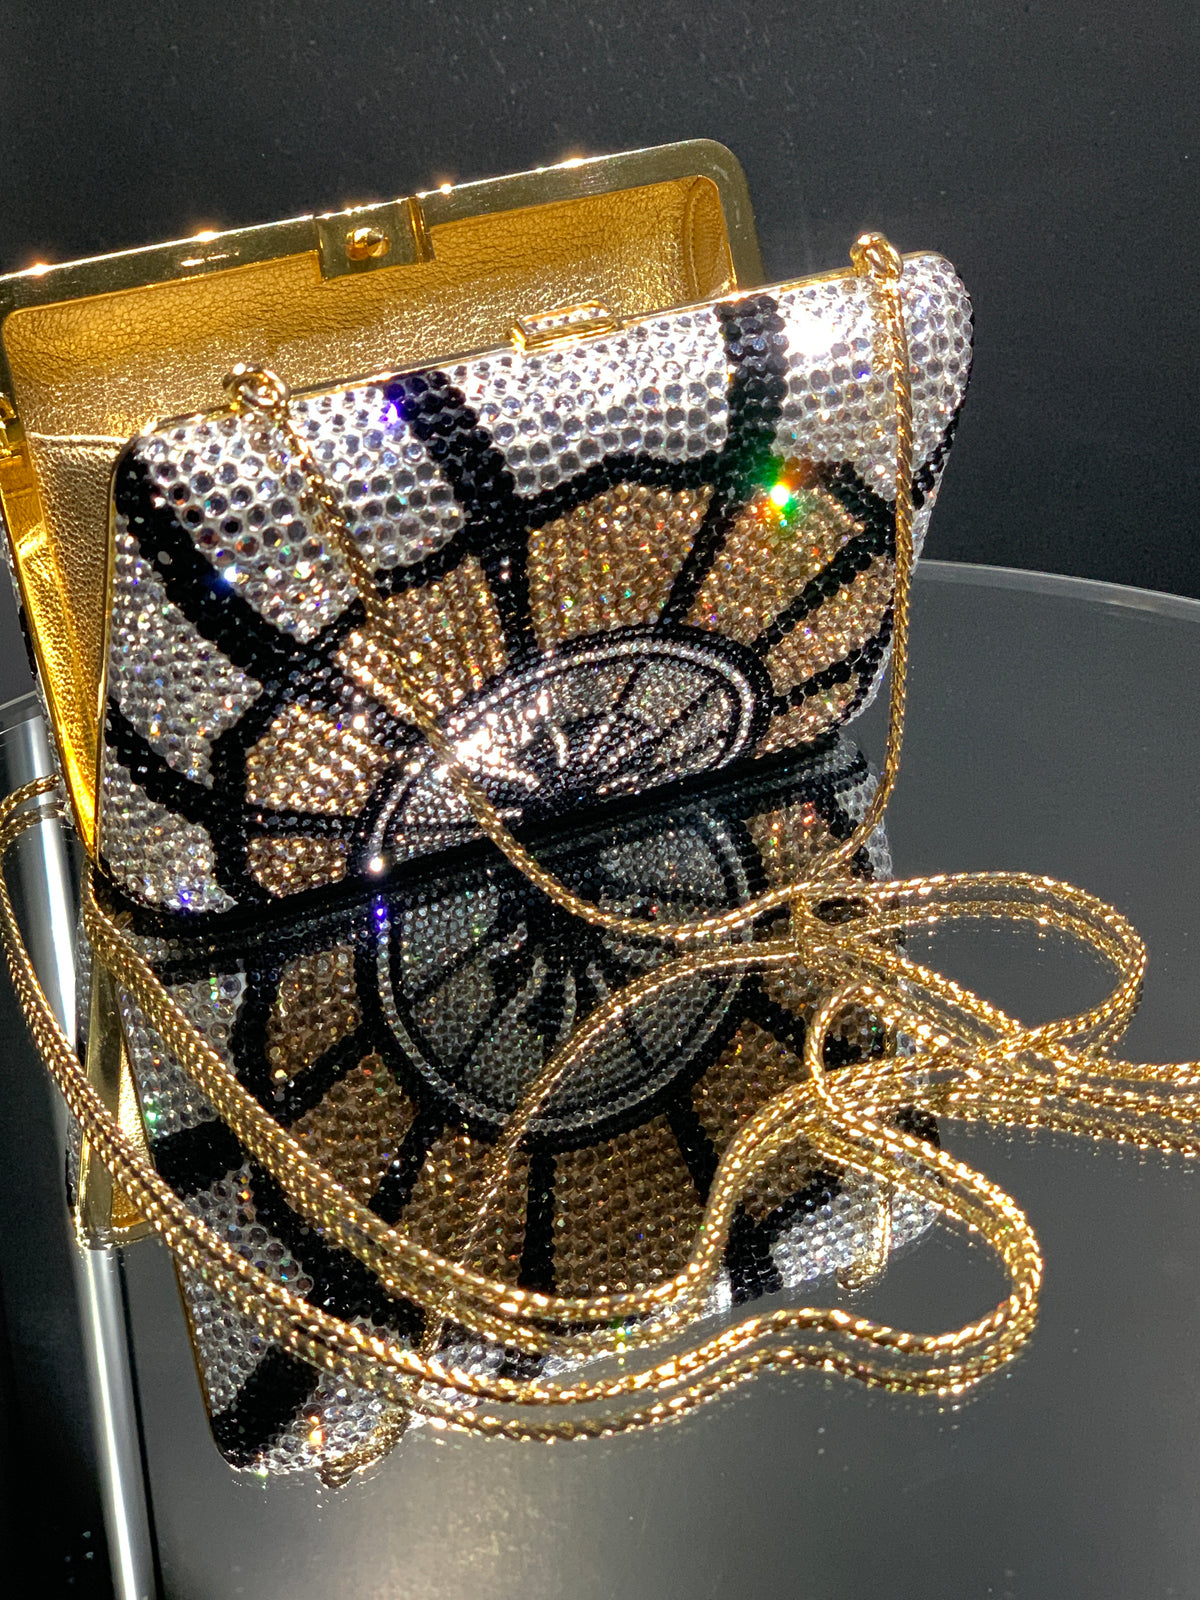 &quot;Sunrise&quot; Limited Edition Crystal Handbag by Judith Leiber